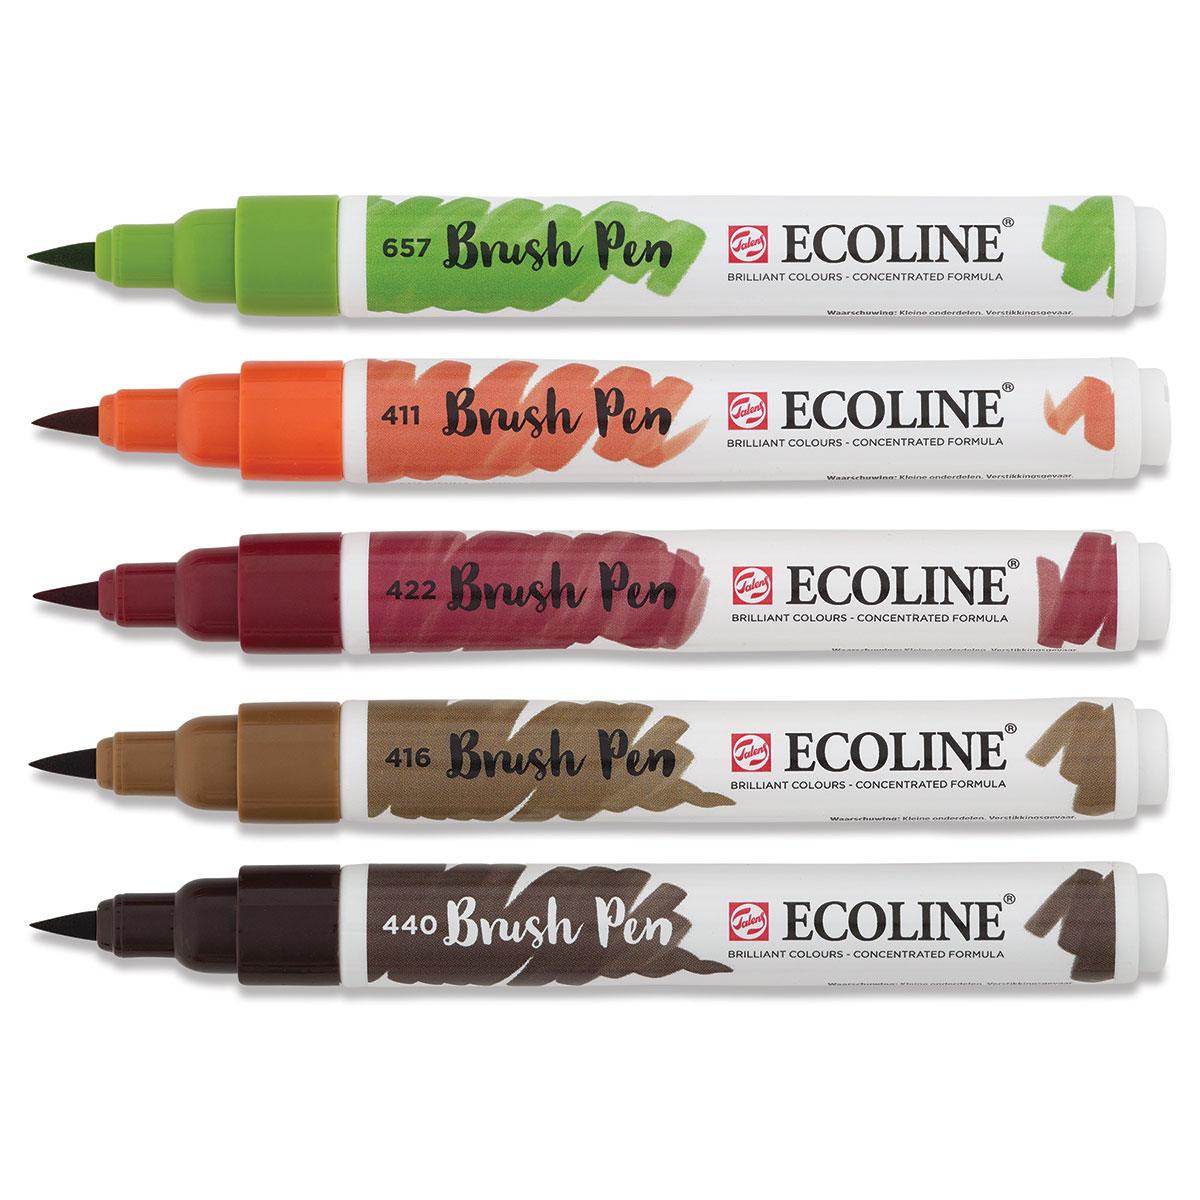 Royal Talens Ecoline Brush Pen Swatches 